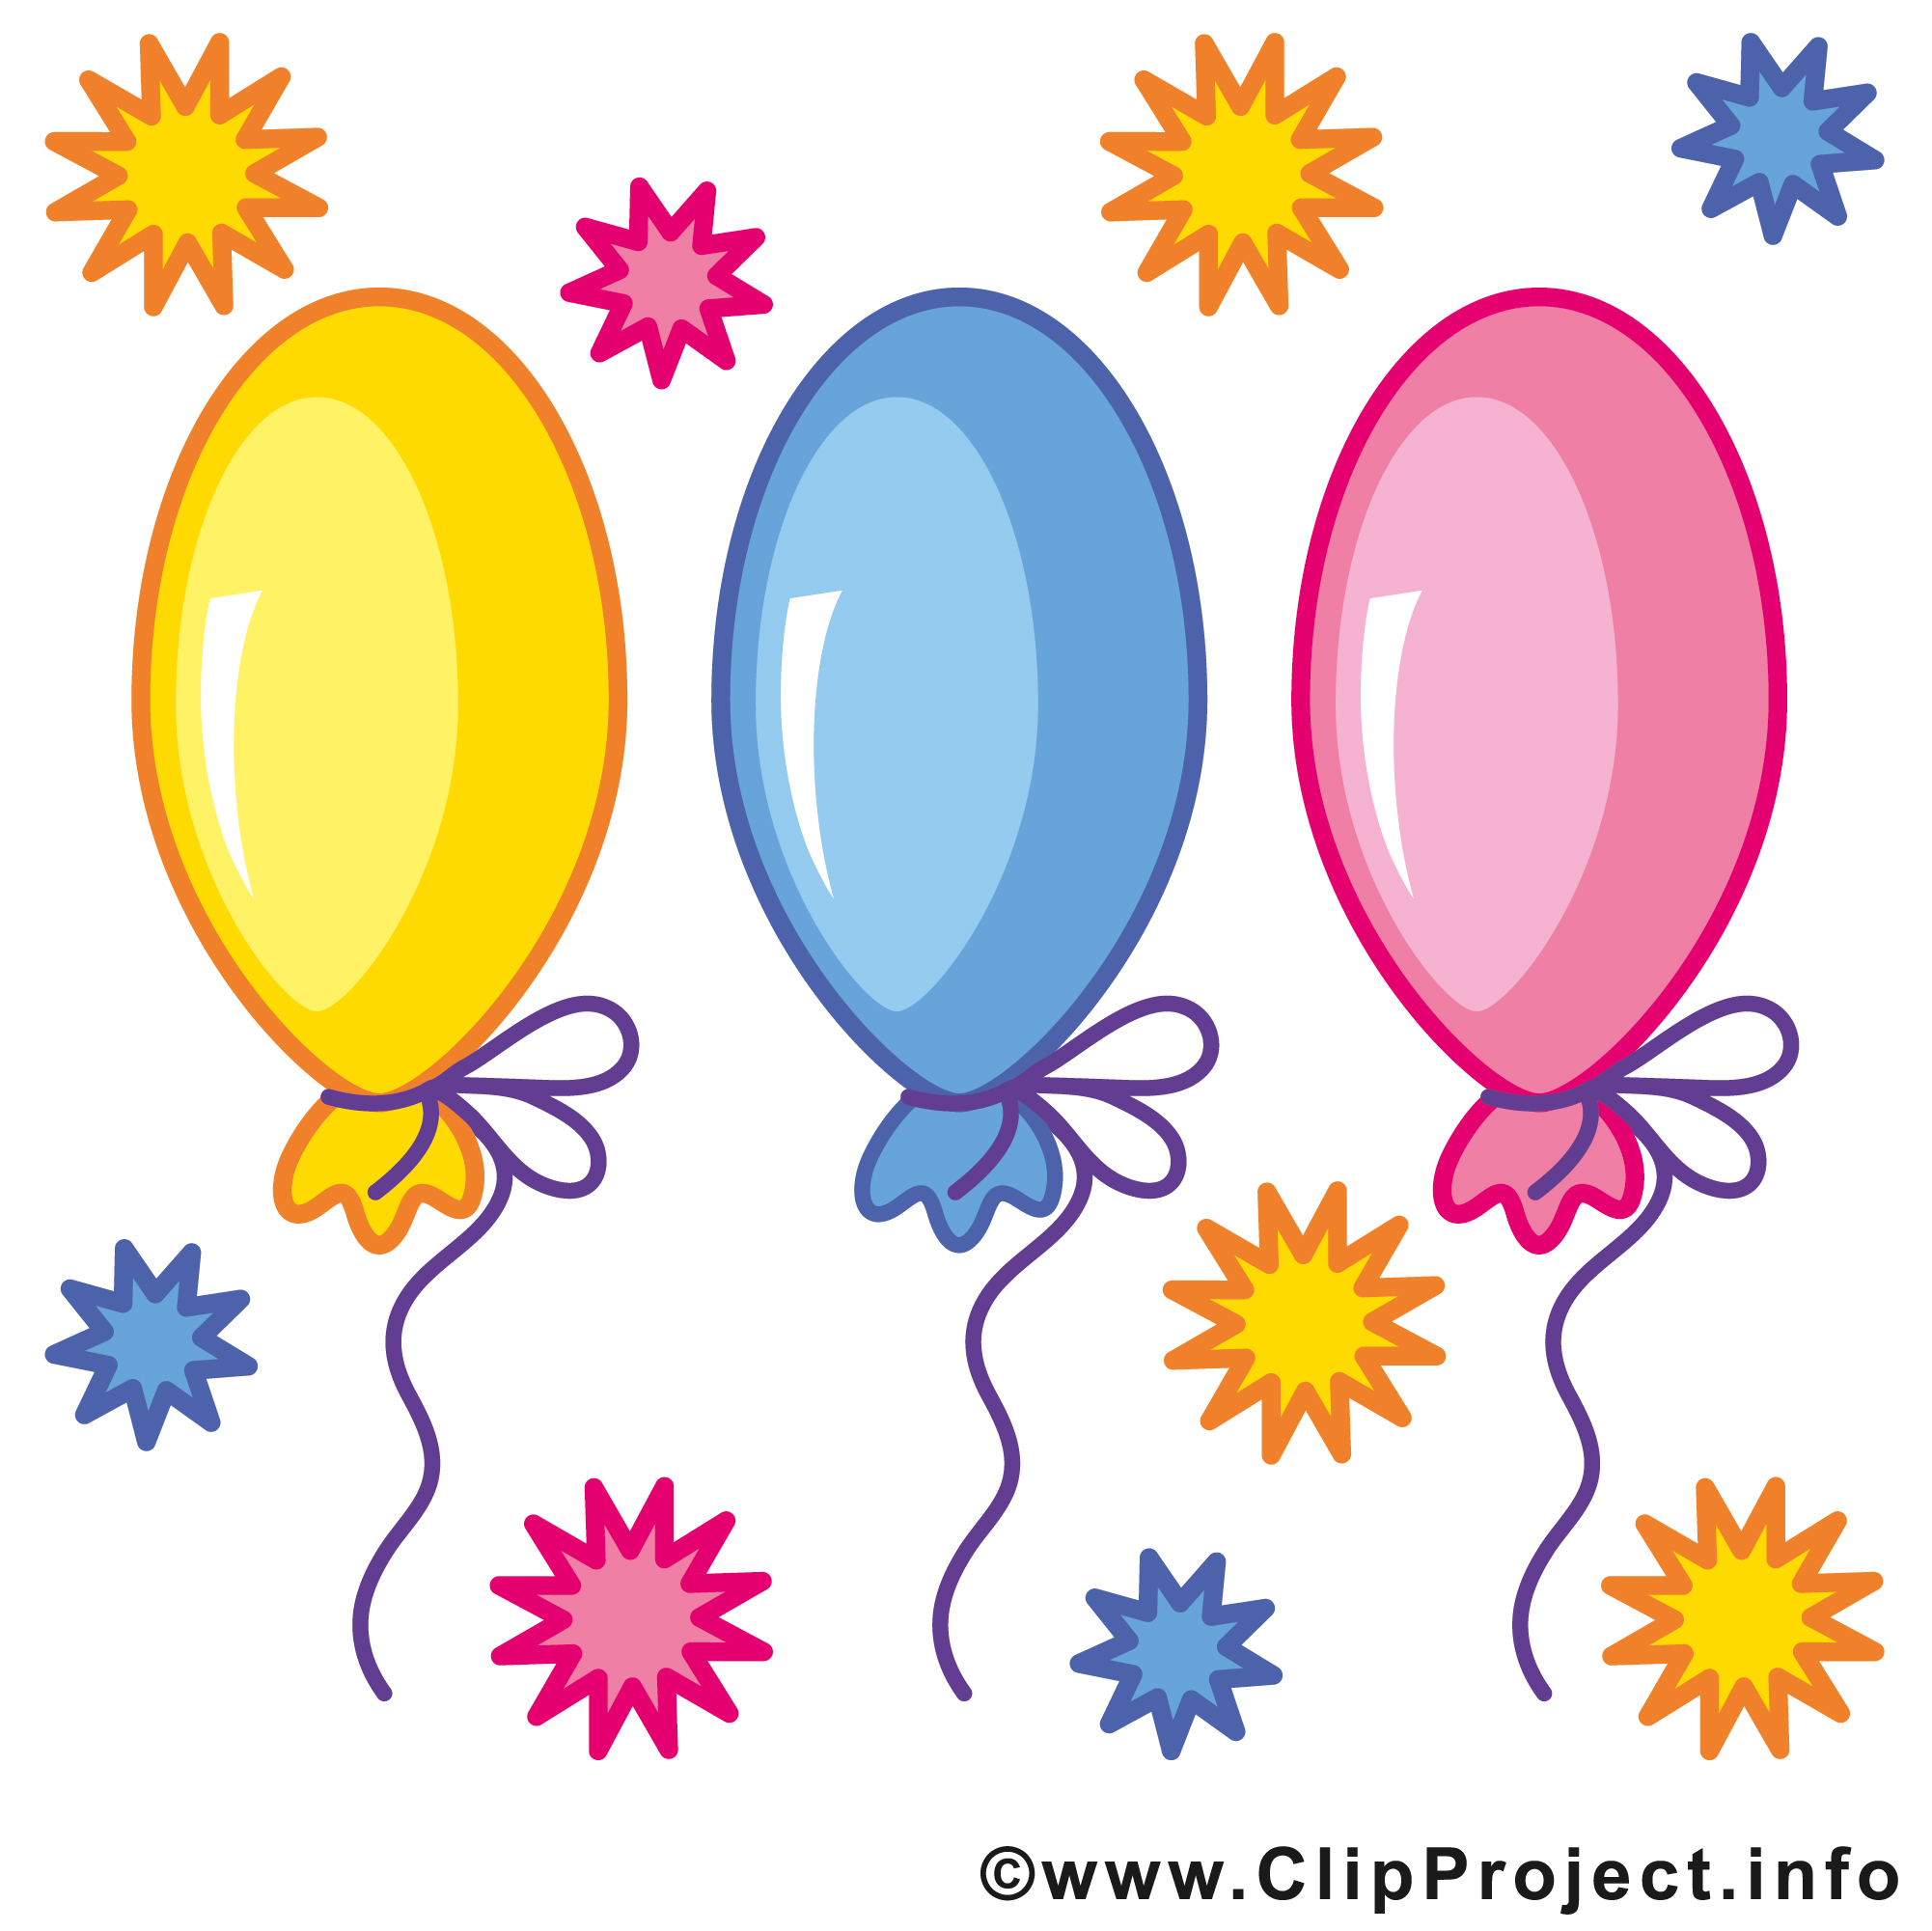 Free clipart - Clipground